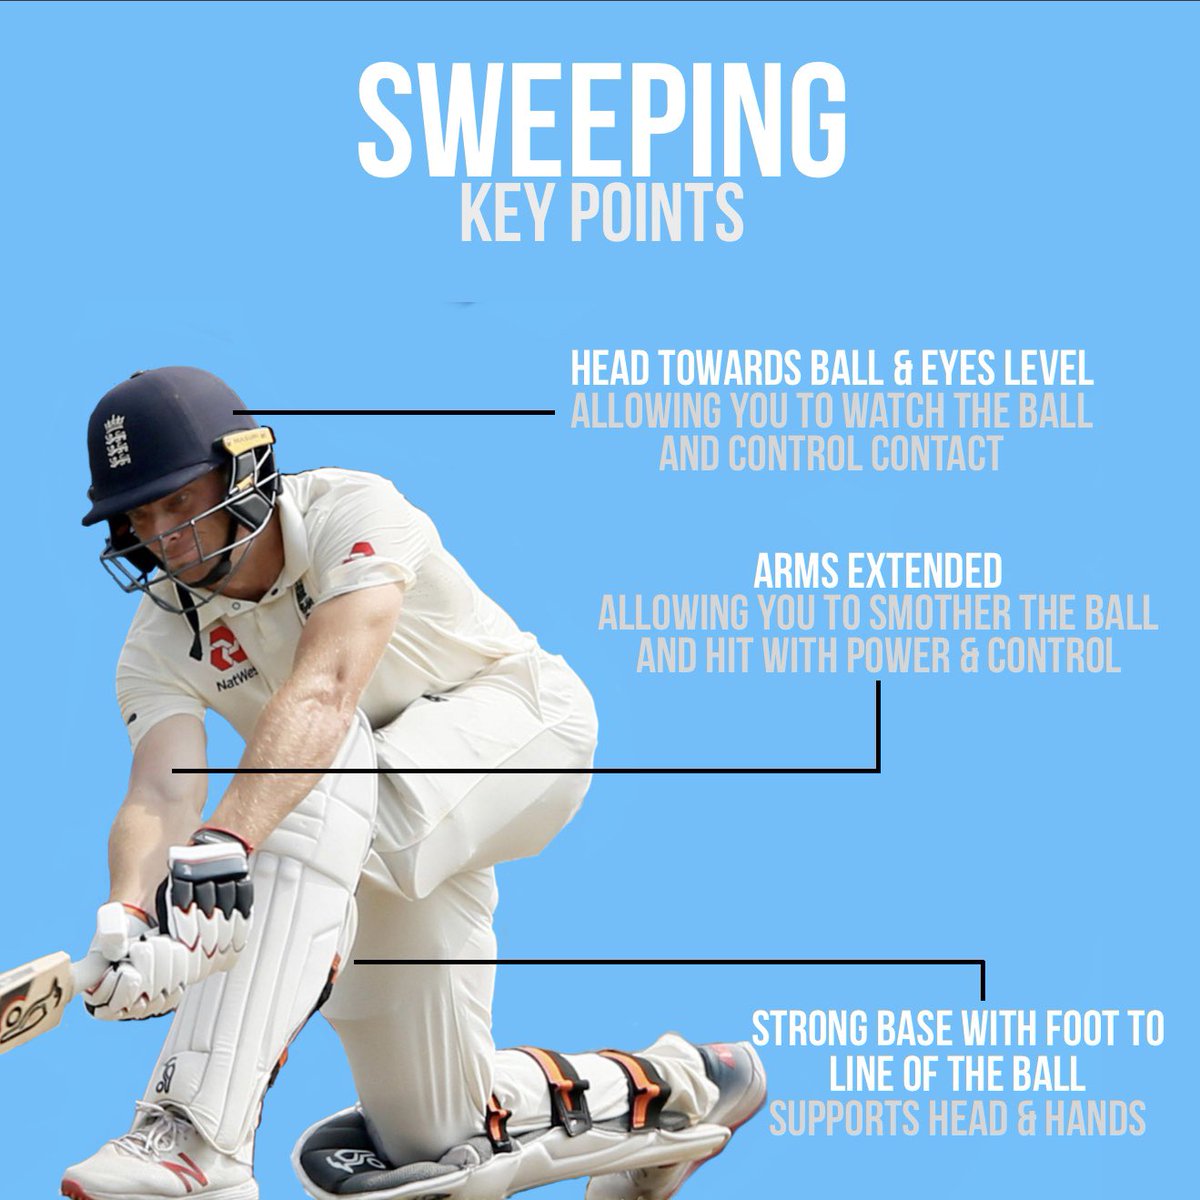 7 Cricket Batting Techniques - The Main Areas That You Should